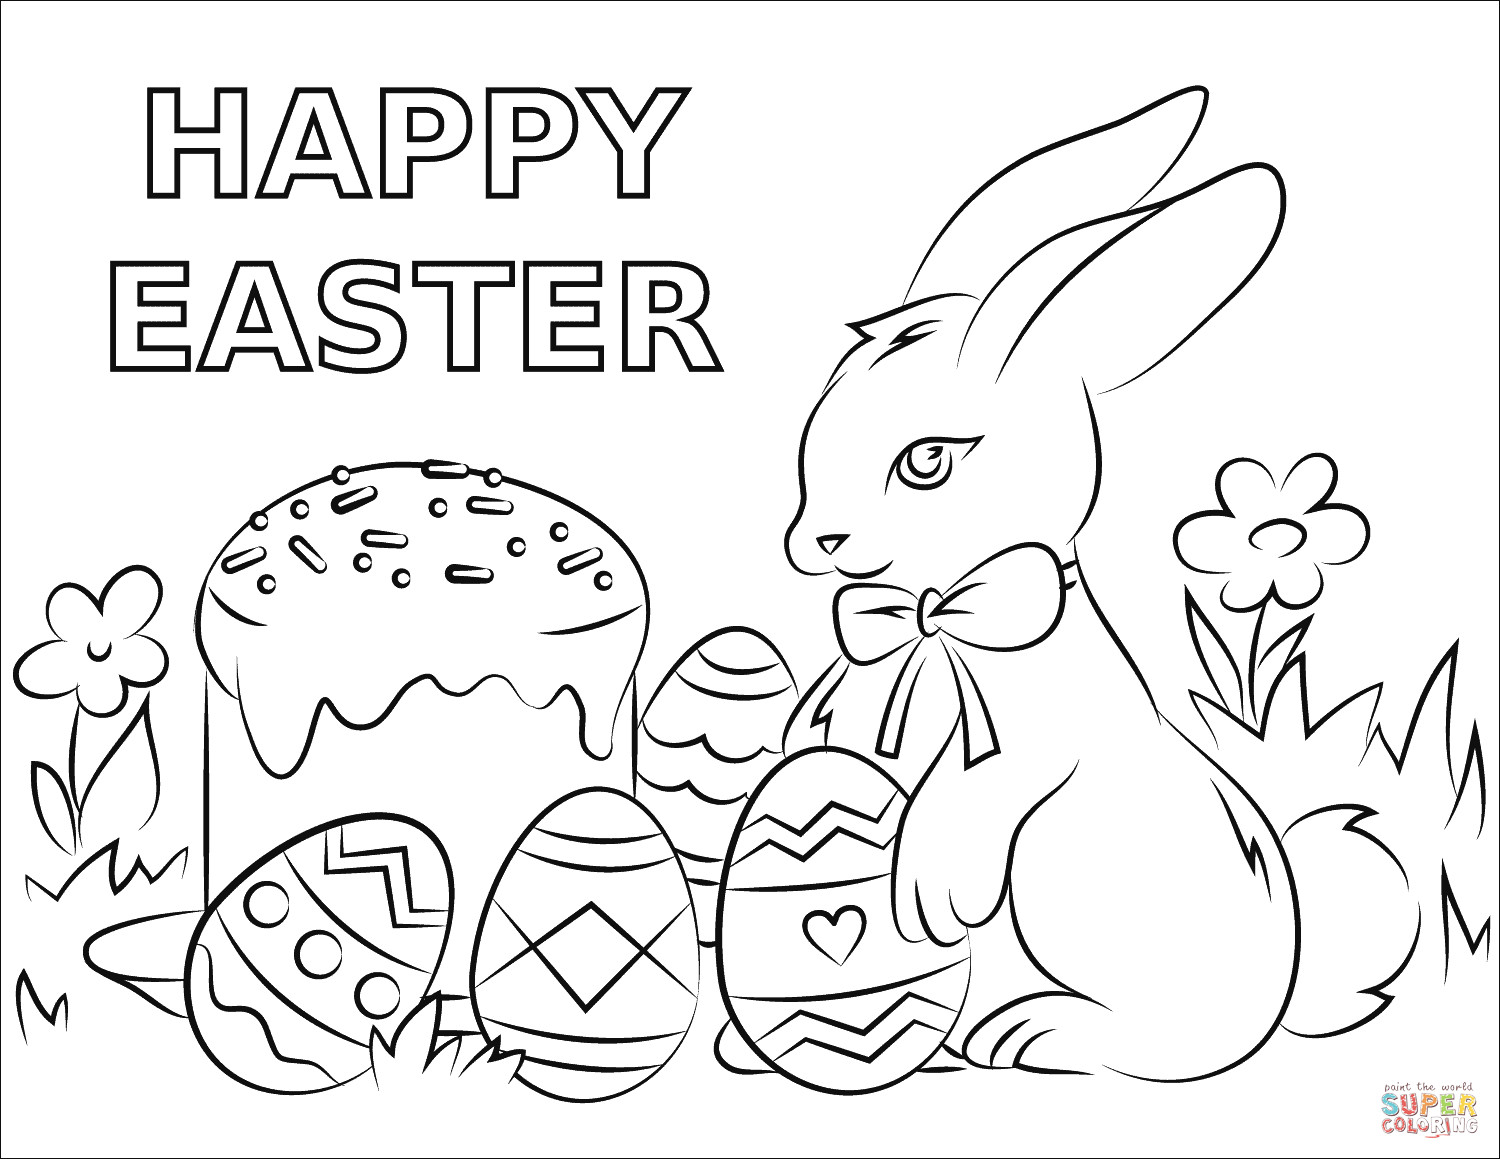 Happy Easter Coloring Pages Free Printable
 Happy Easter coloring page